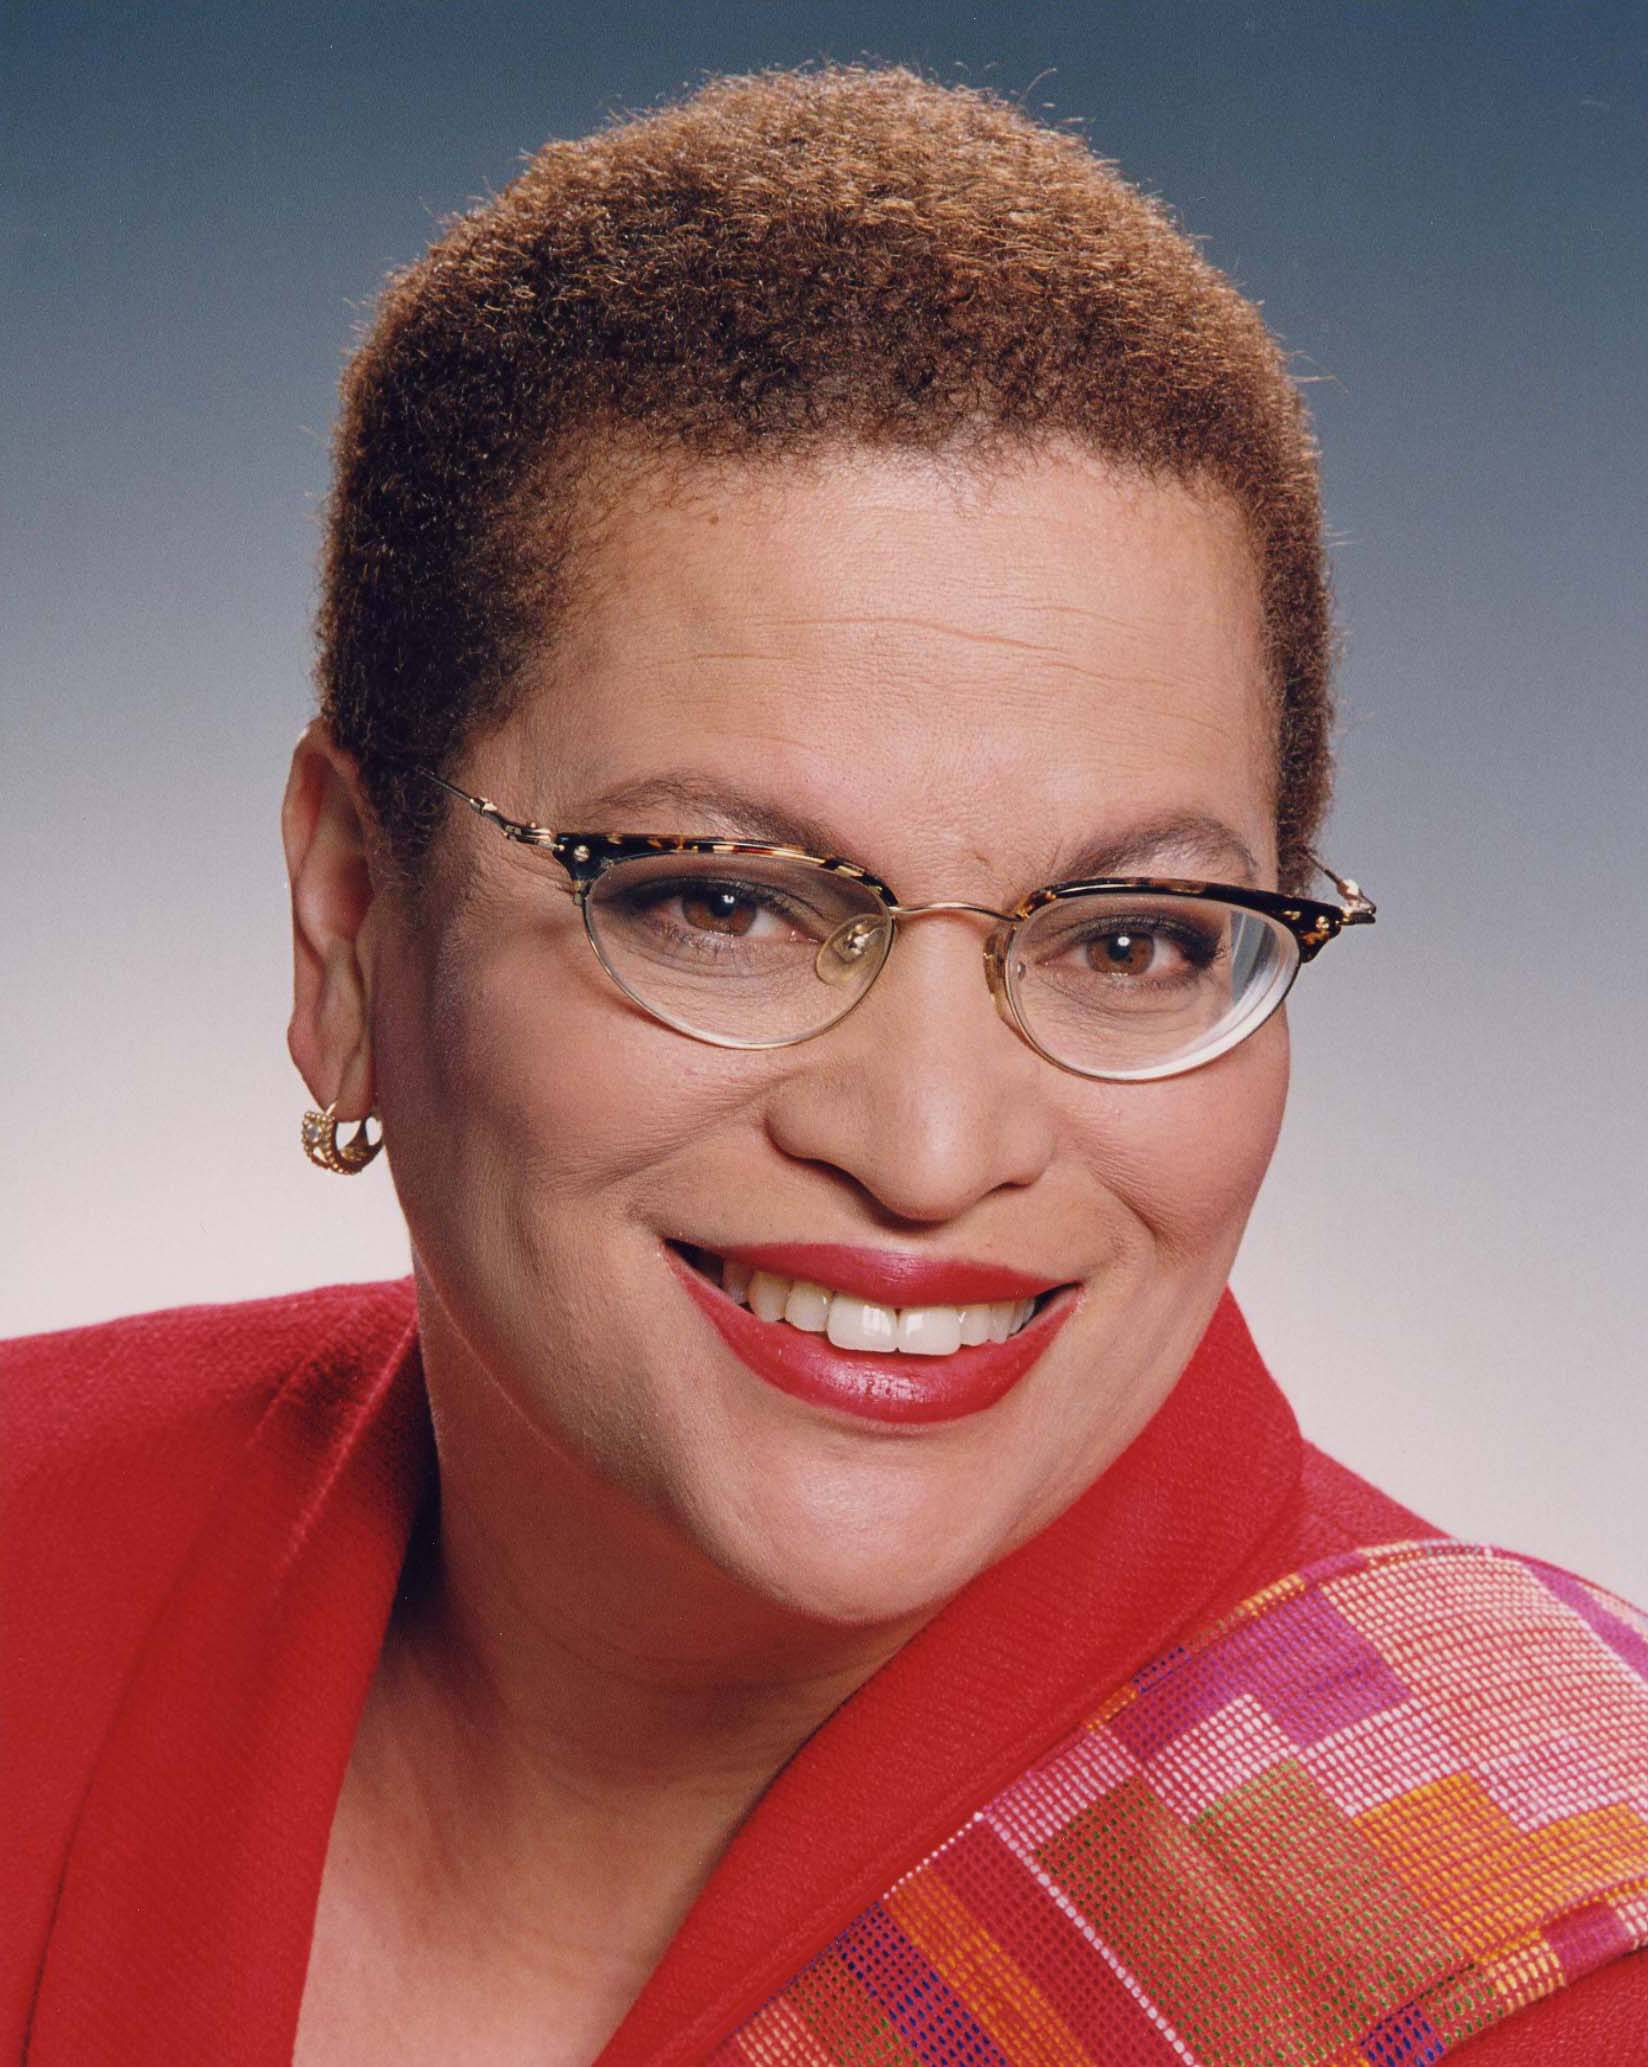 Julianne Malveaux to Step Down as President of Bennett College&nbsp; - Bennett College, the historically Black all-women’s college, announced last week that President Julianne Malveaux is resigning. Her resignation will be effective May 6. The noted economist and author has led the college since 2007. She is leaving to pursue other challenges, the press statement said.(Photo: Wikicommons)